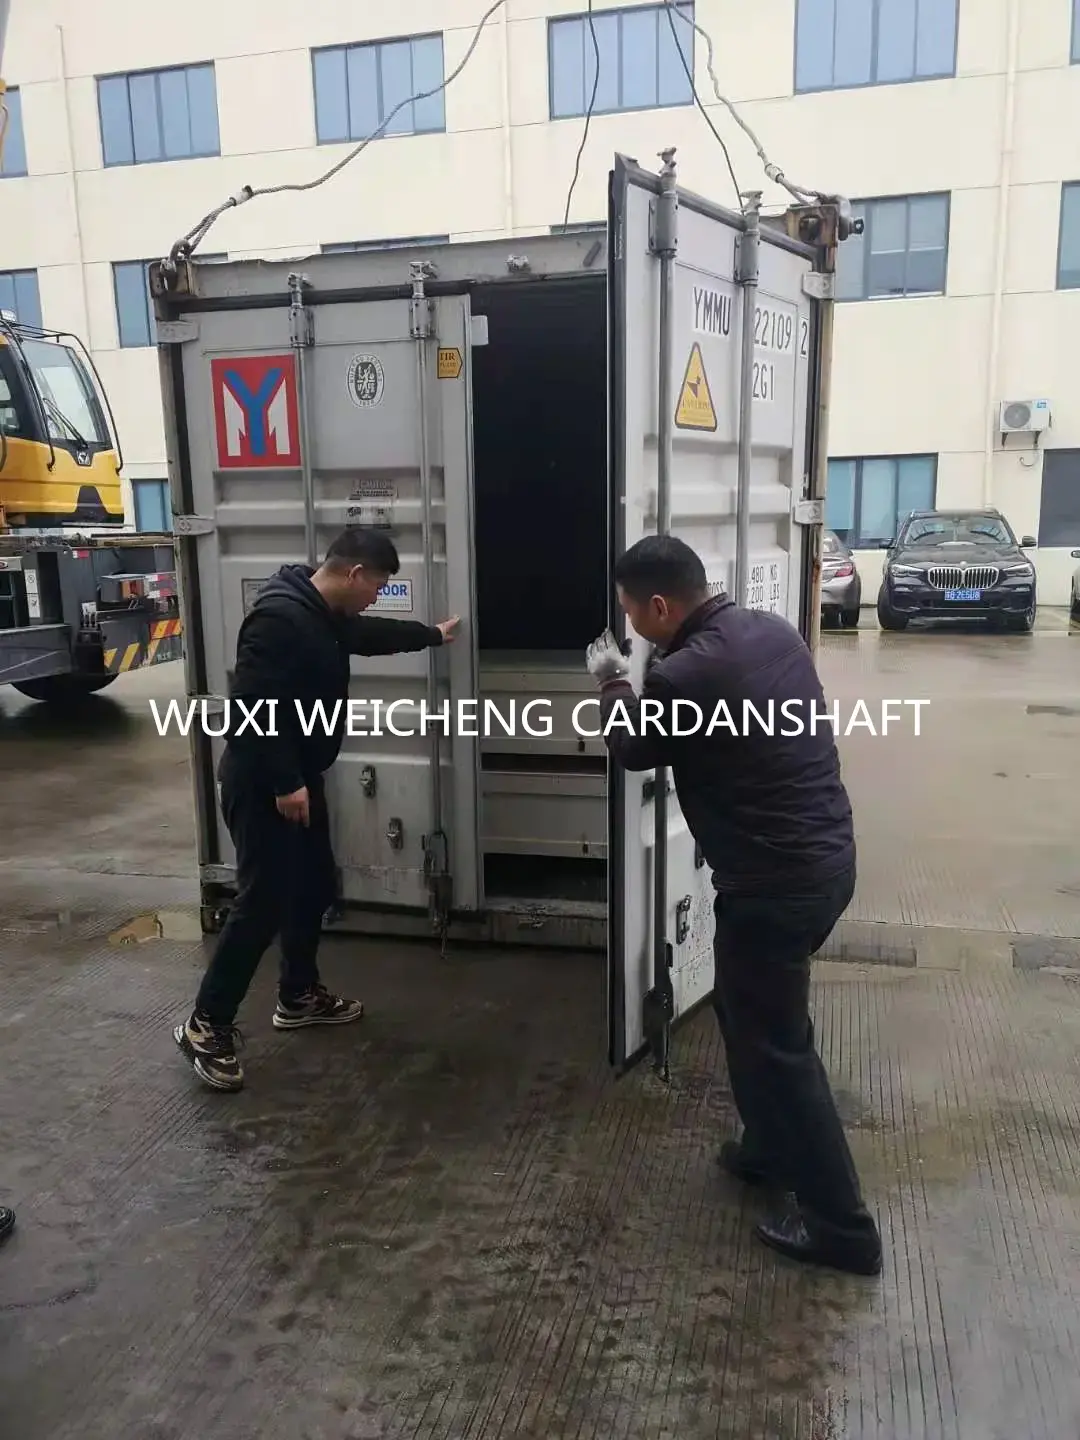 The container full of our cardan shafts has been successfully delivered to Saudi customer